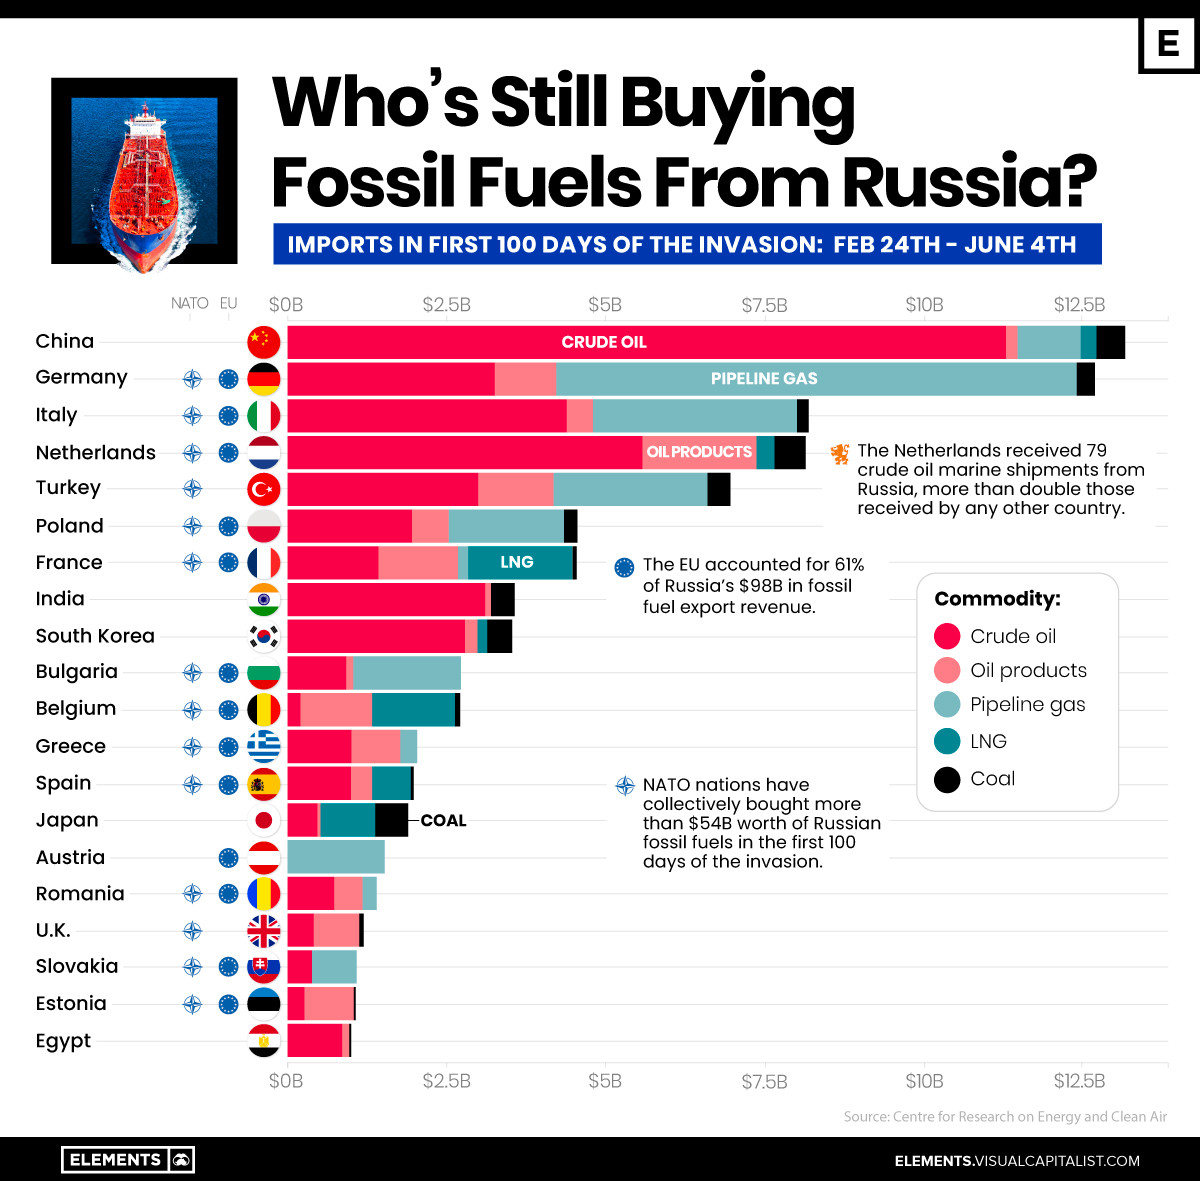 Who’s Still Buying Fossil Fuels From Russia?